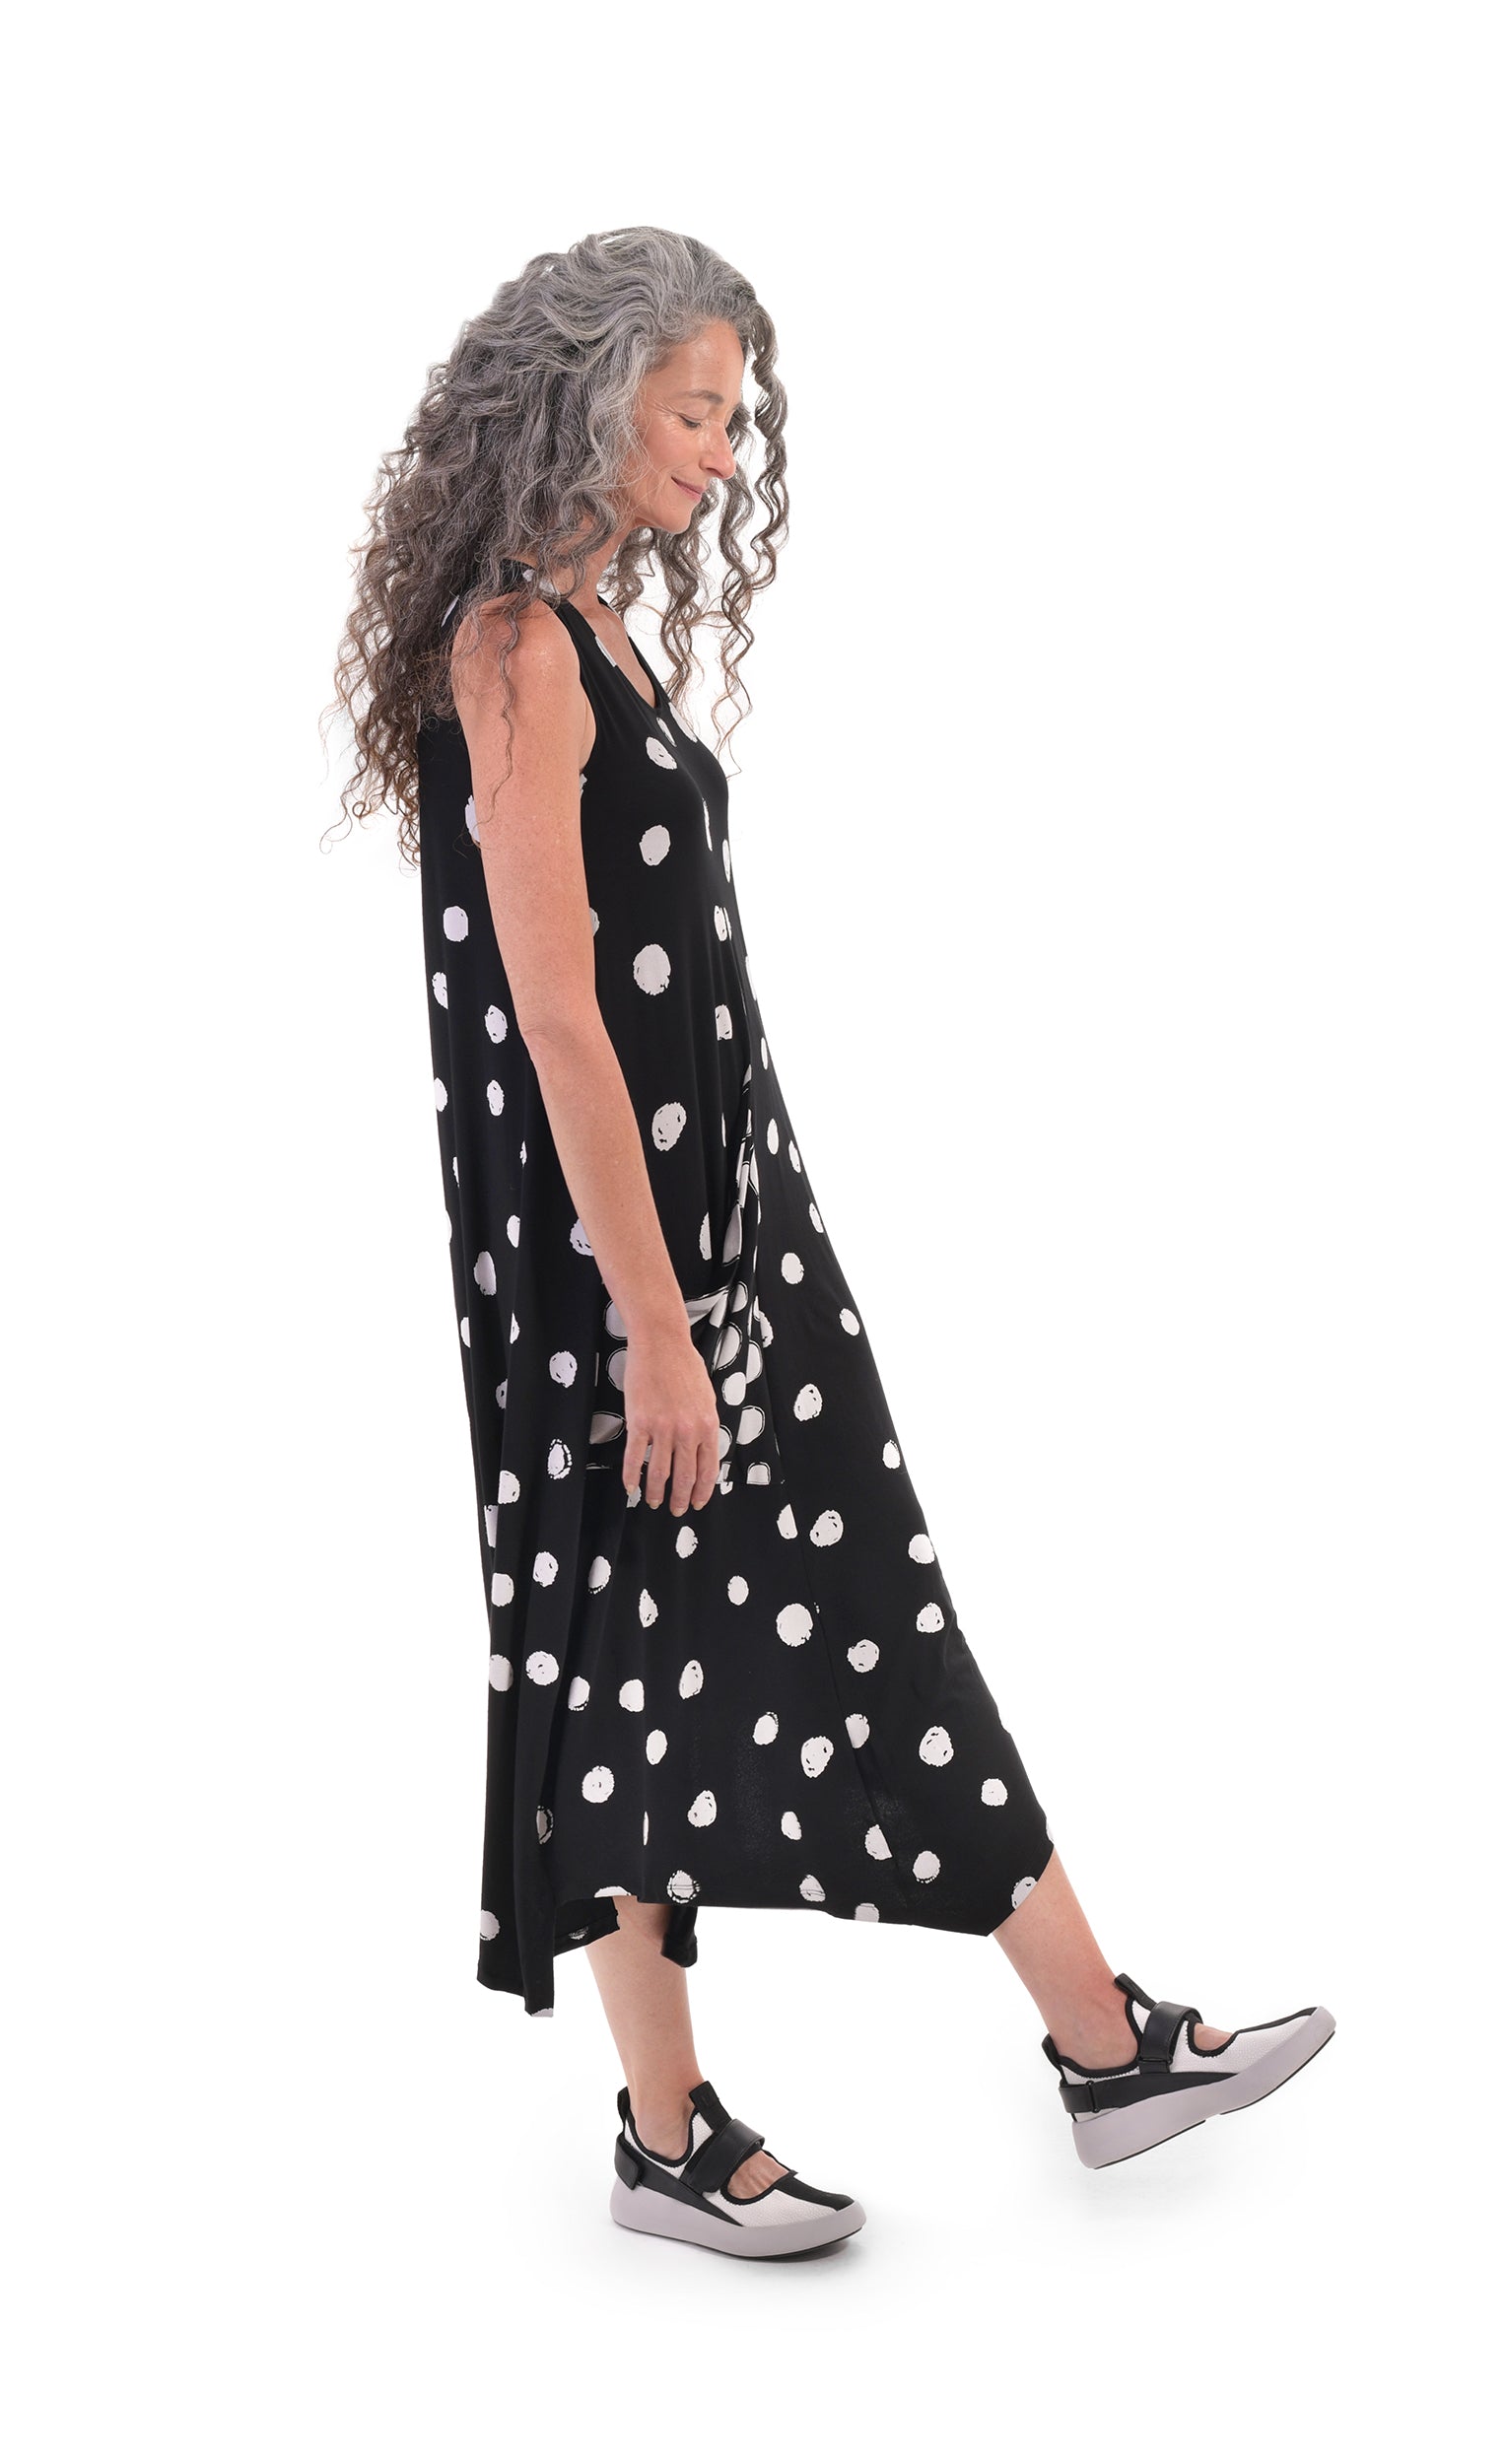 Right sided full body view of a woman wearing the alembika Lia Spotted Jersey Hi-Low Maxi Dress. This sleeveless dress is black with white spiral circles all over it. The front has a scoop neck and a right-sided draped pocket. The hem is asymmetrical and high-low